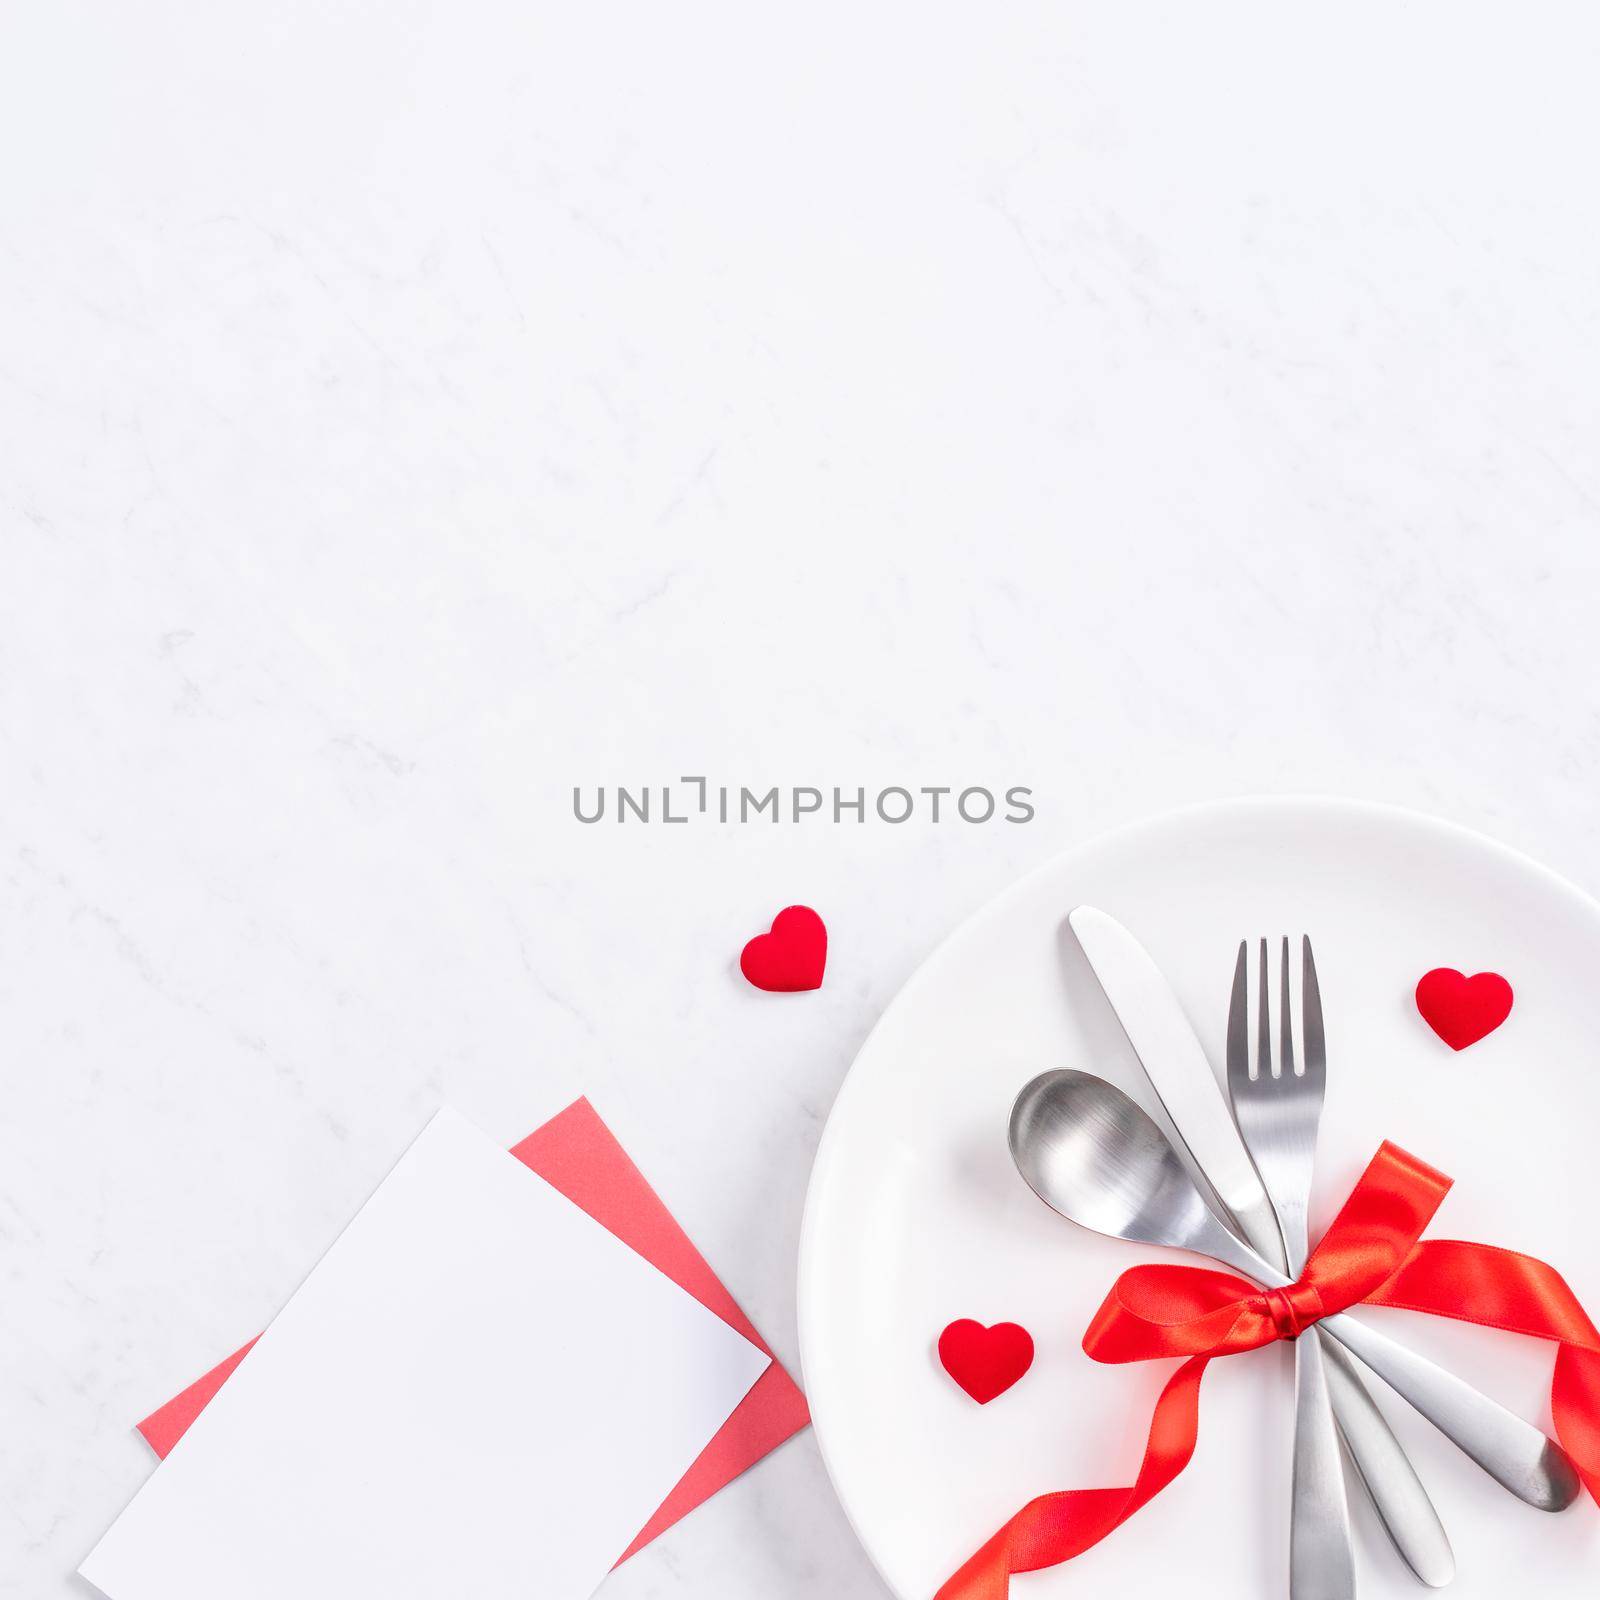 Valentine's Day, Mother's Day, holiday dating meal, banquet design concept - White plate and red ribbon on marble background, top view, flat lay.